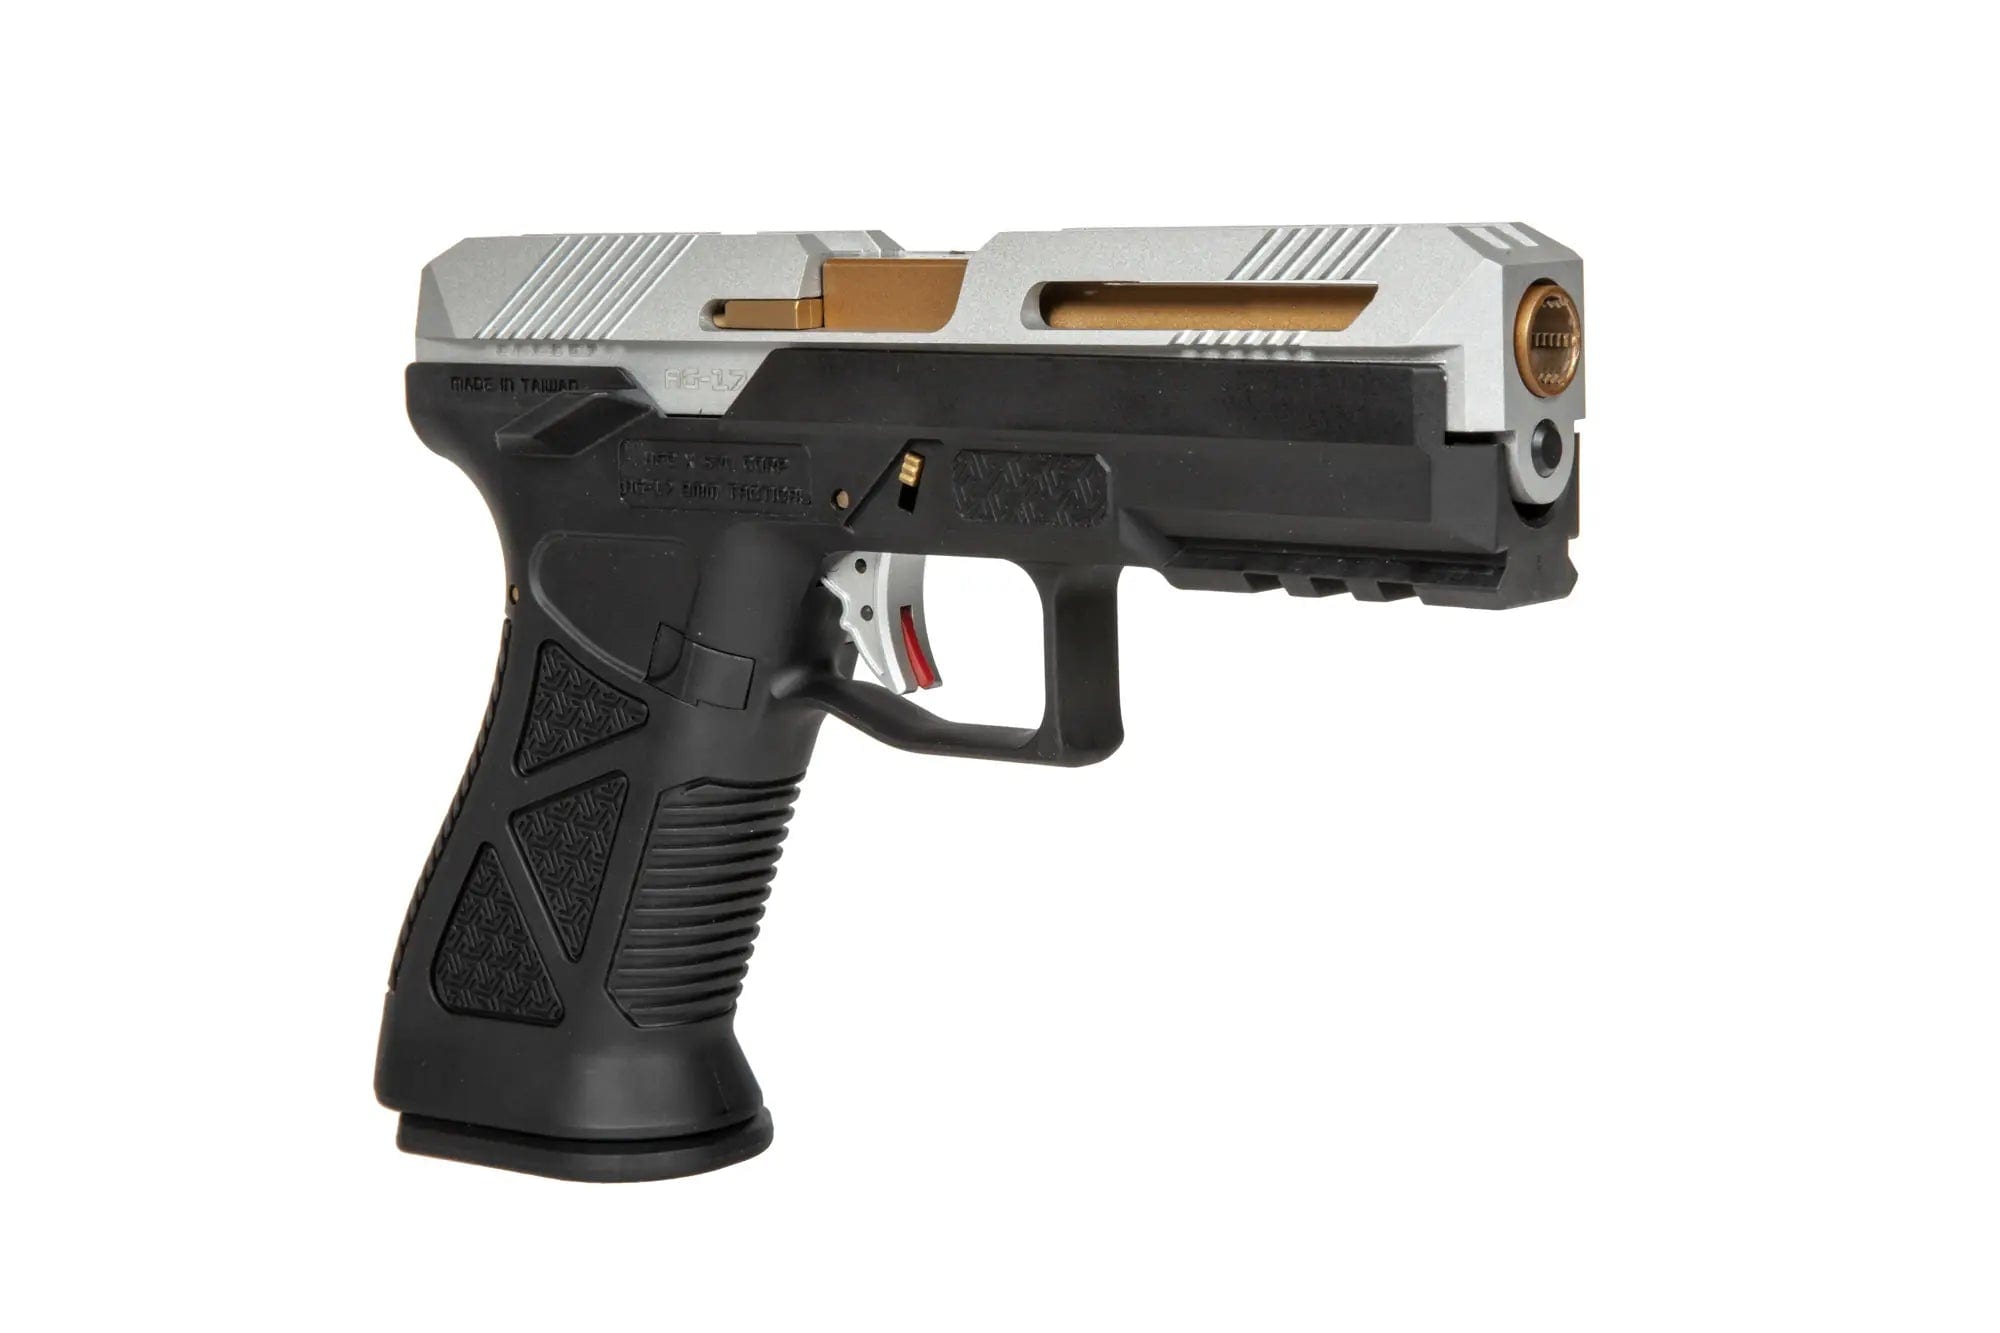 AG17 airsoft blowback pistol - silver and black